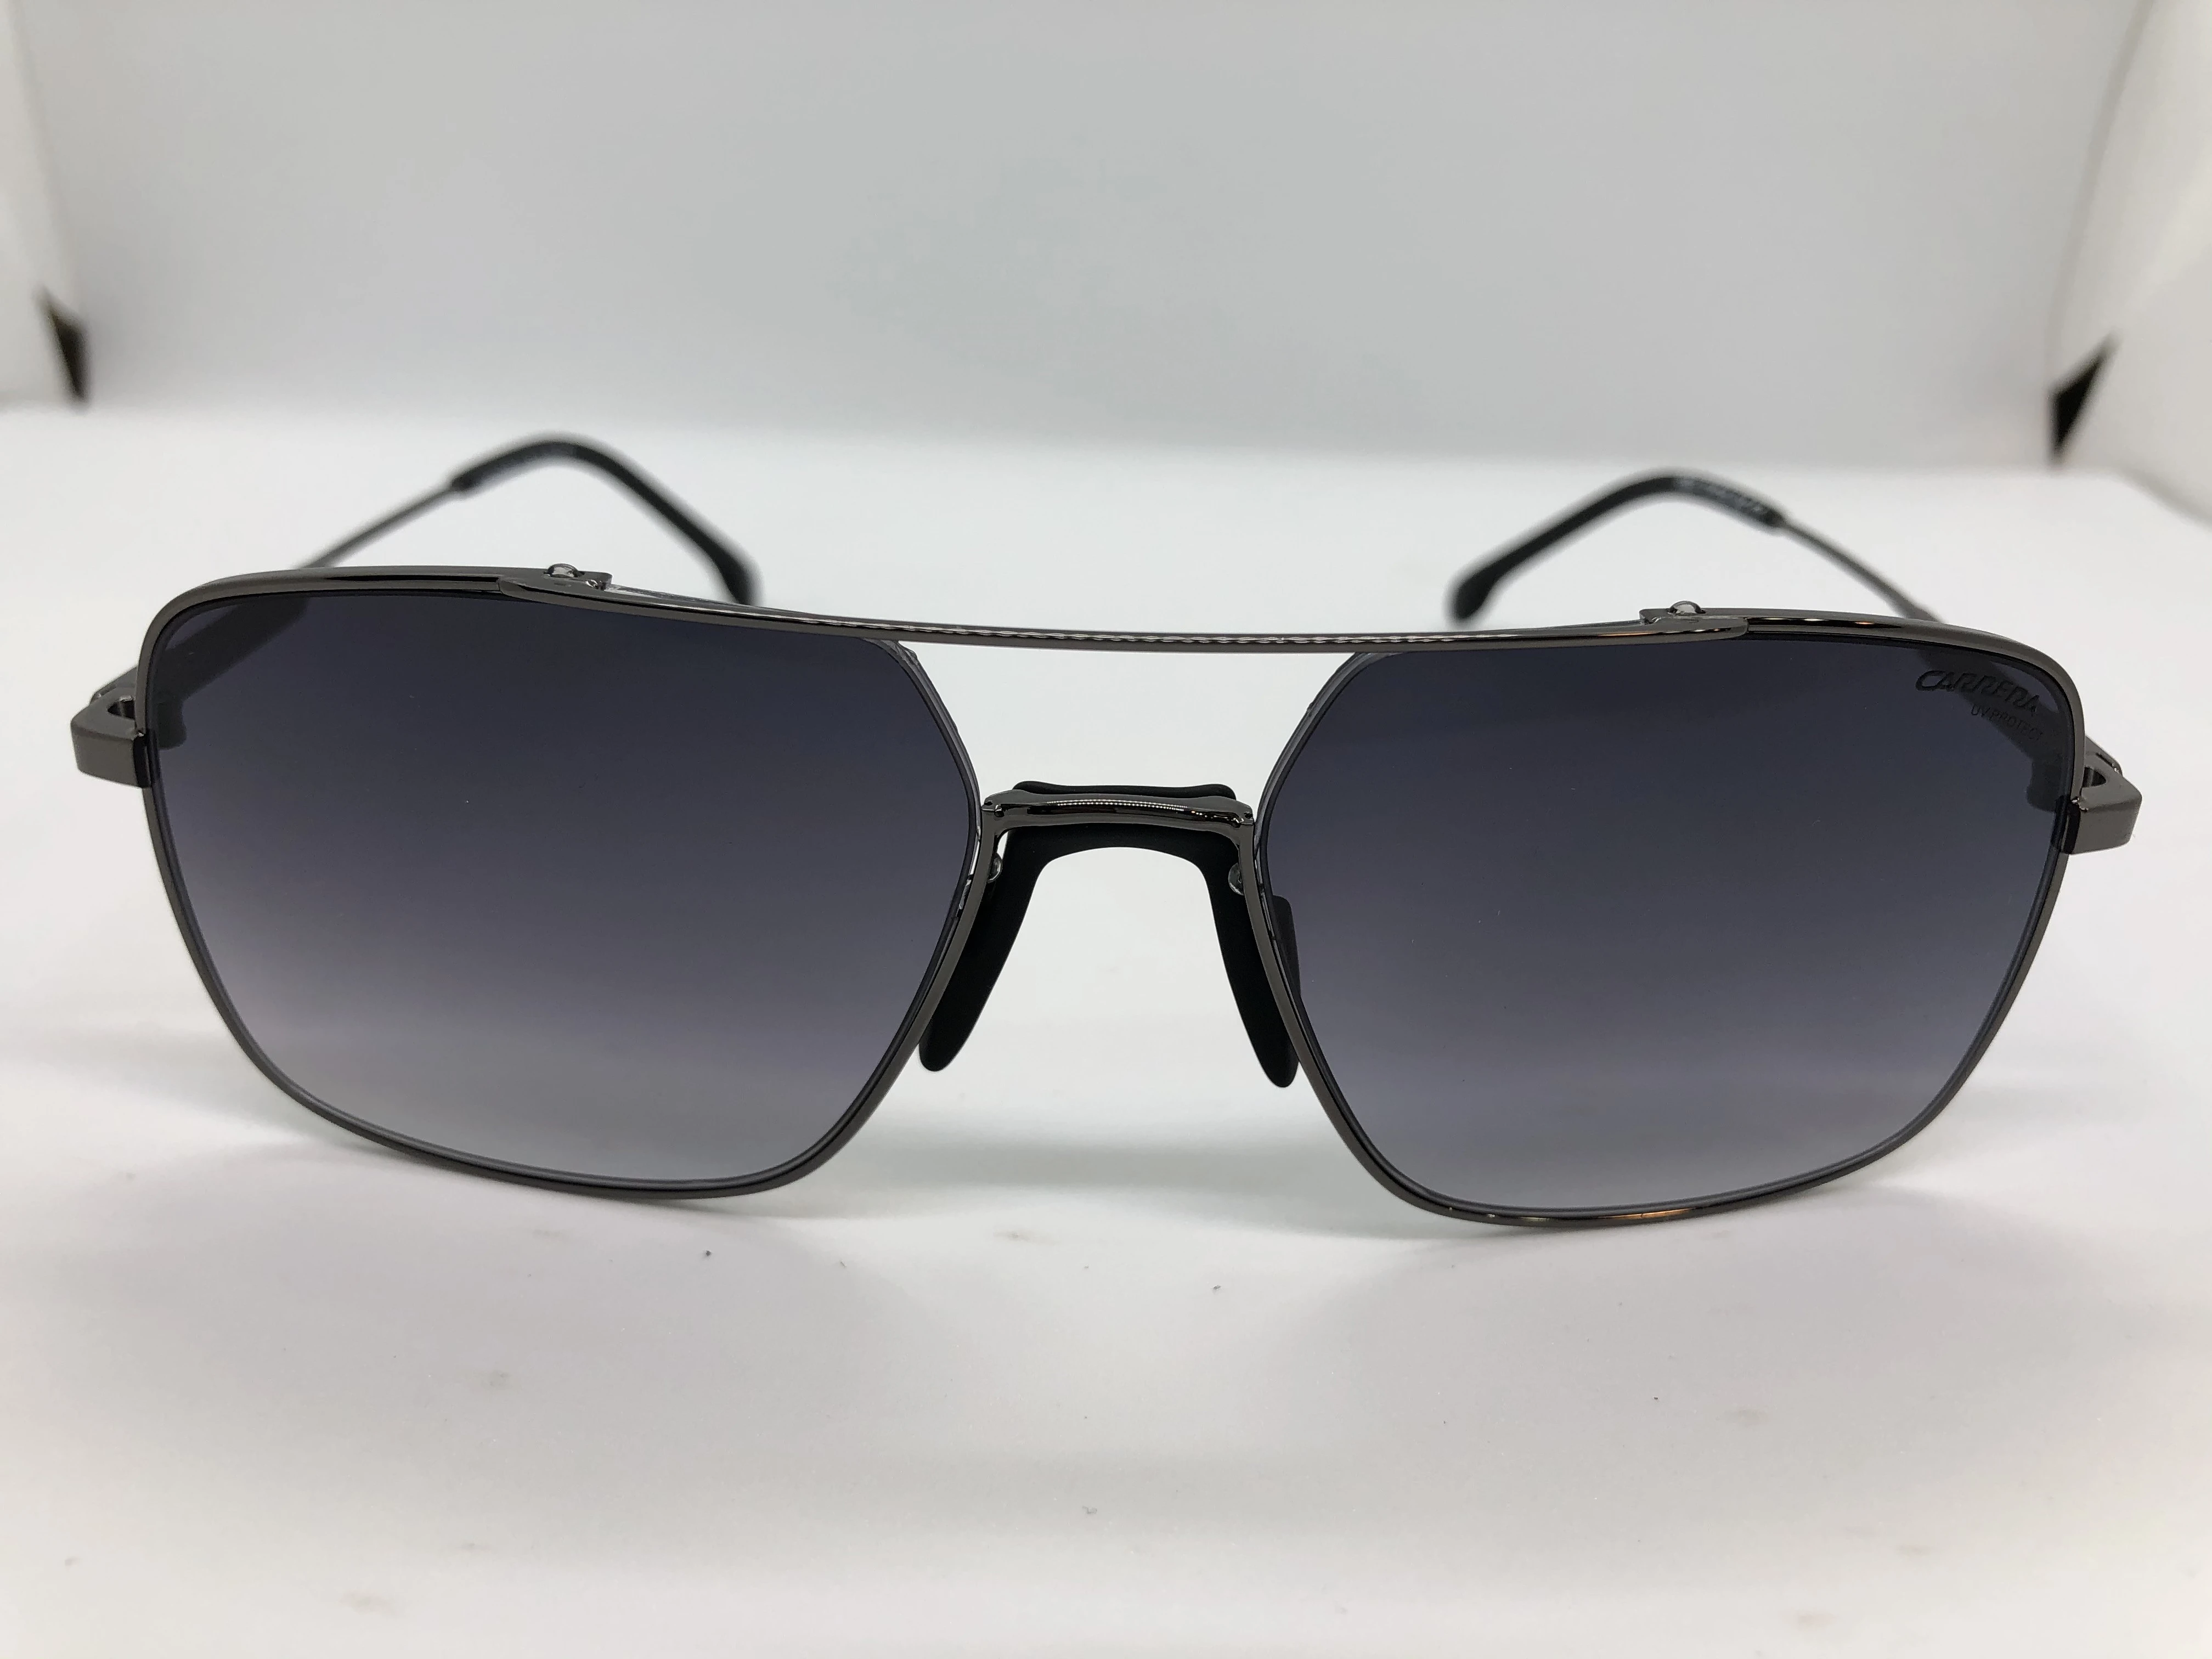 Sunglasses - from Carrera - with a black metal frame - black gradient lenses - and a black metal arm - with a brand logo - for men